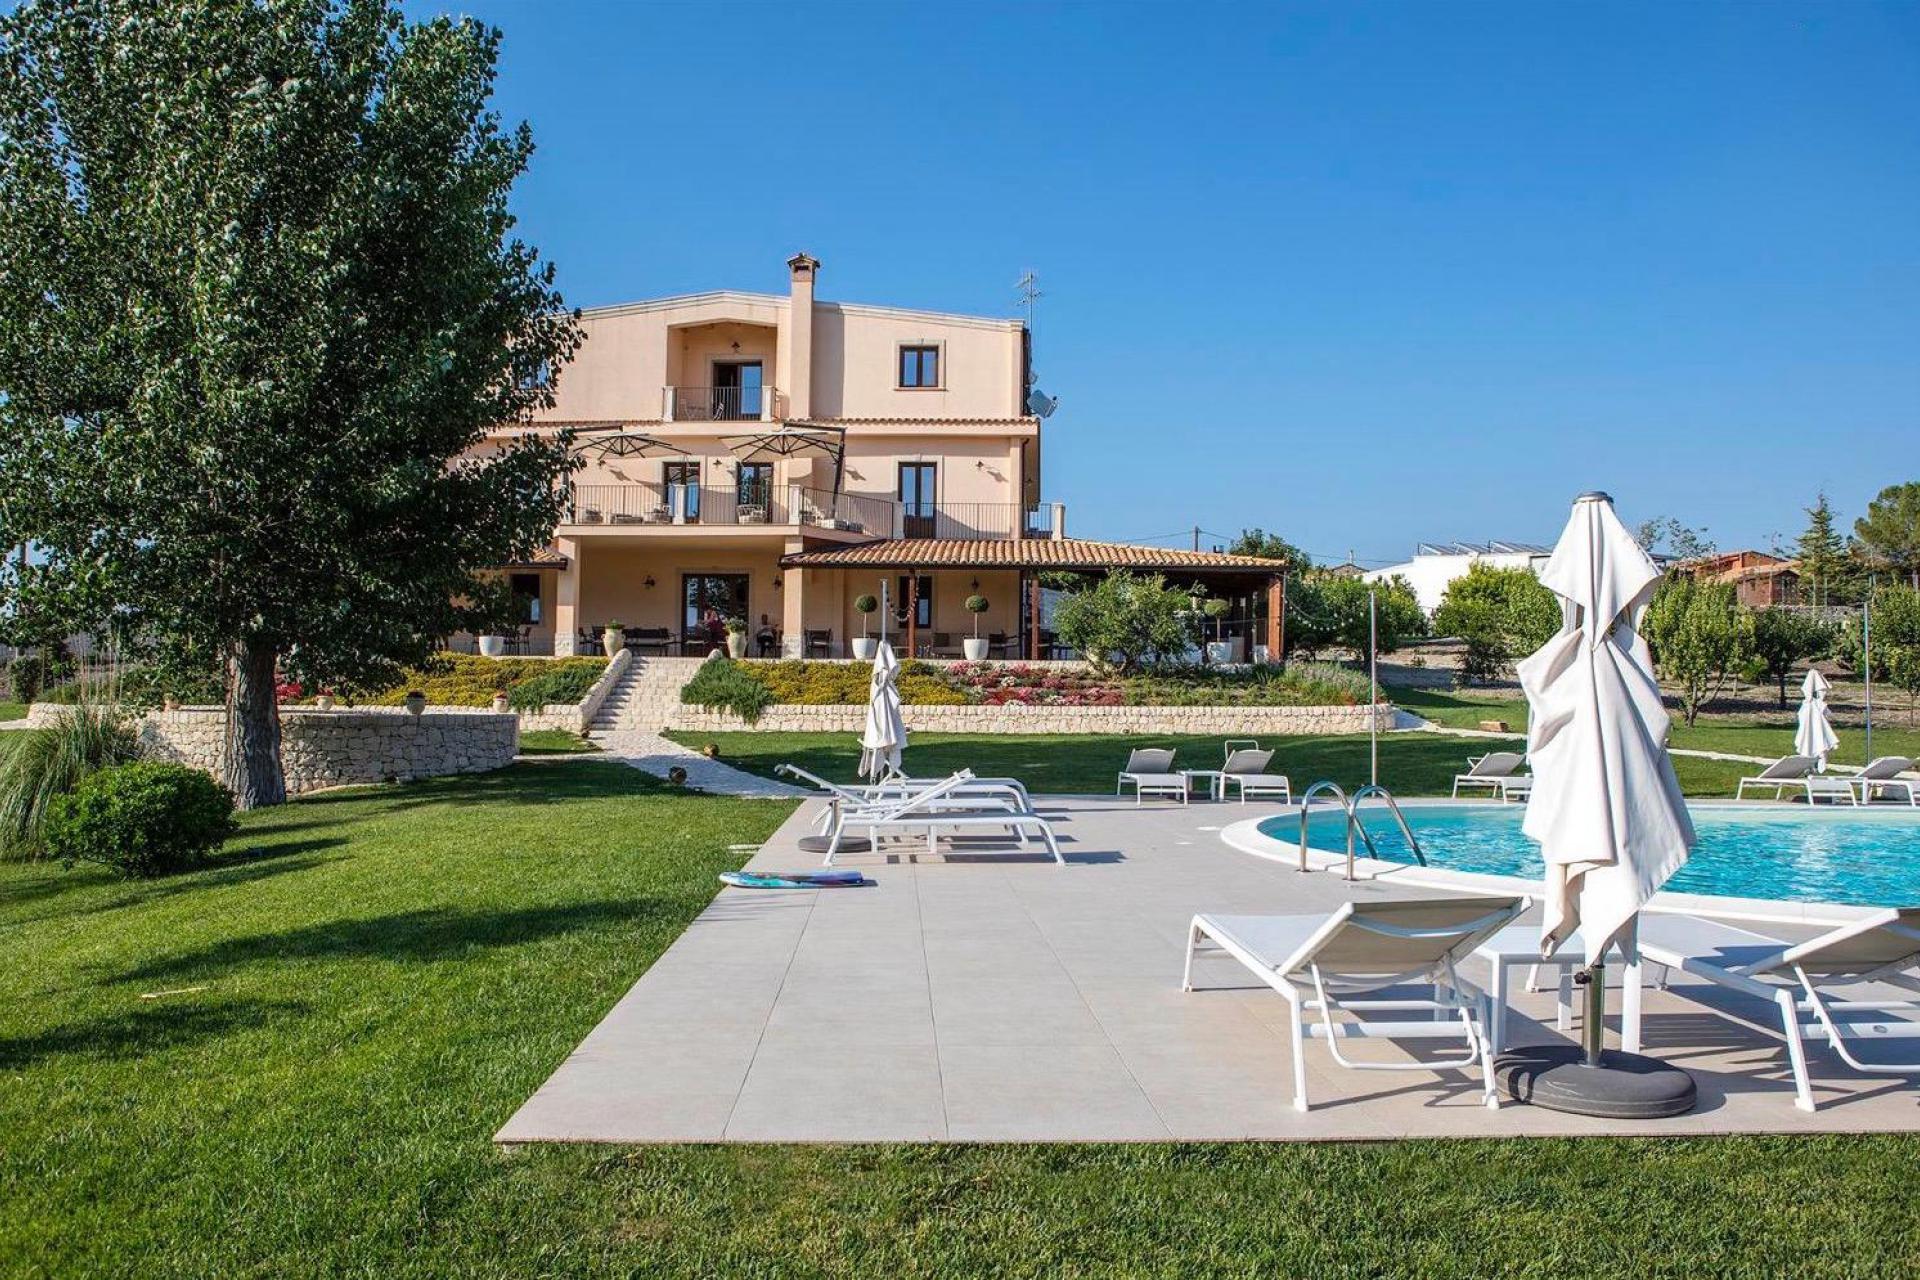 Agriturismo Sicily Child friendly agriturismo Sicily with beautiful pool